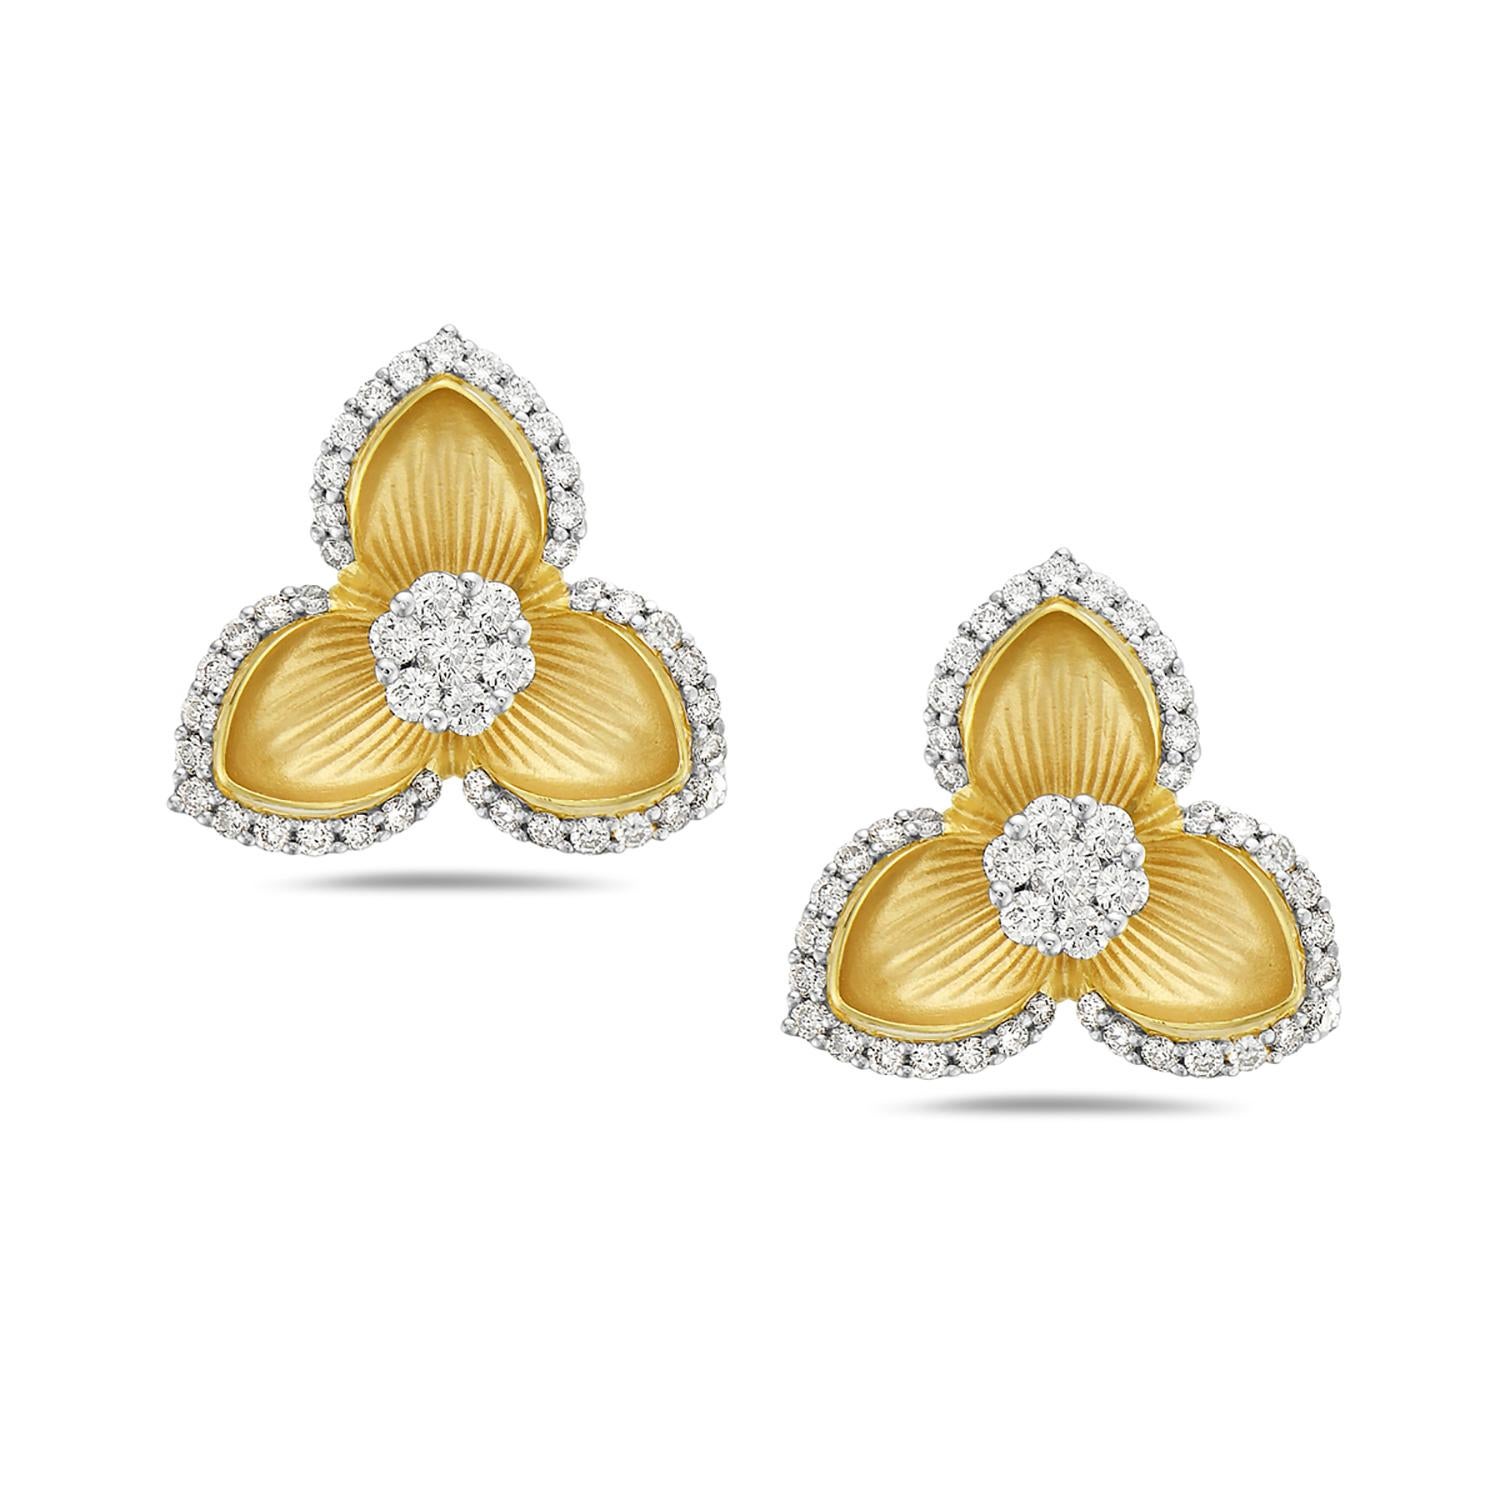 Carved Flower's Petals Shaped Earrings Made in 14k Yellow Gold with Diamonds In New Condition For Sale In New York, NY